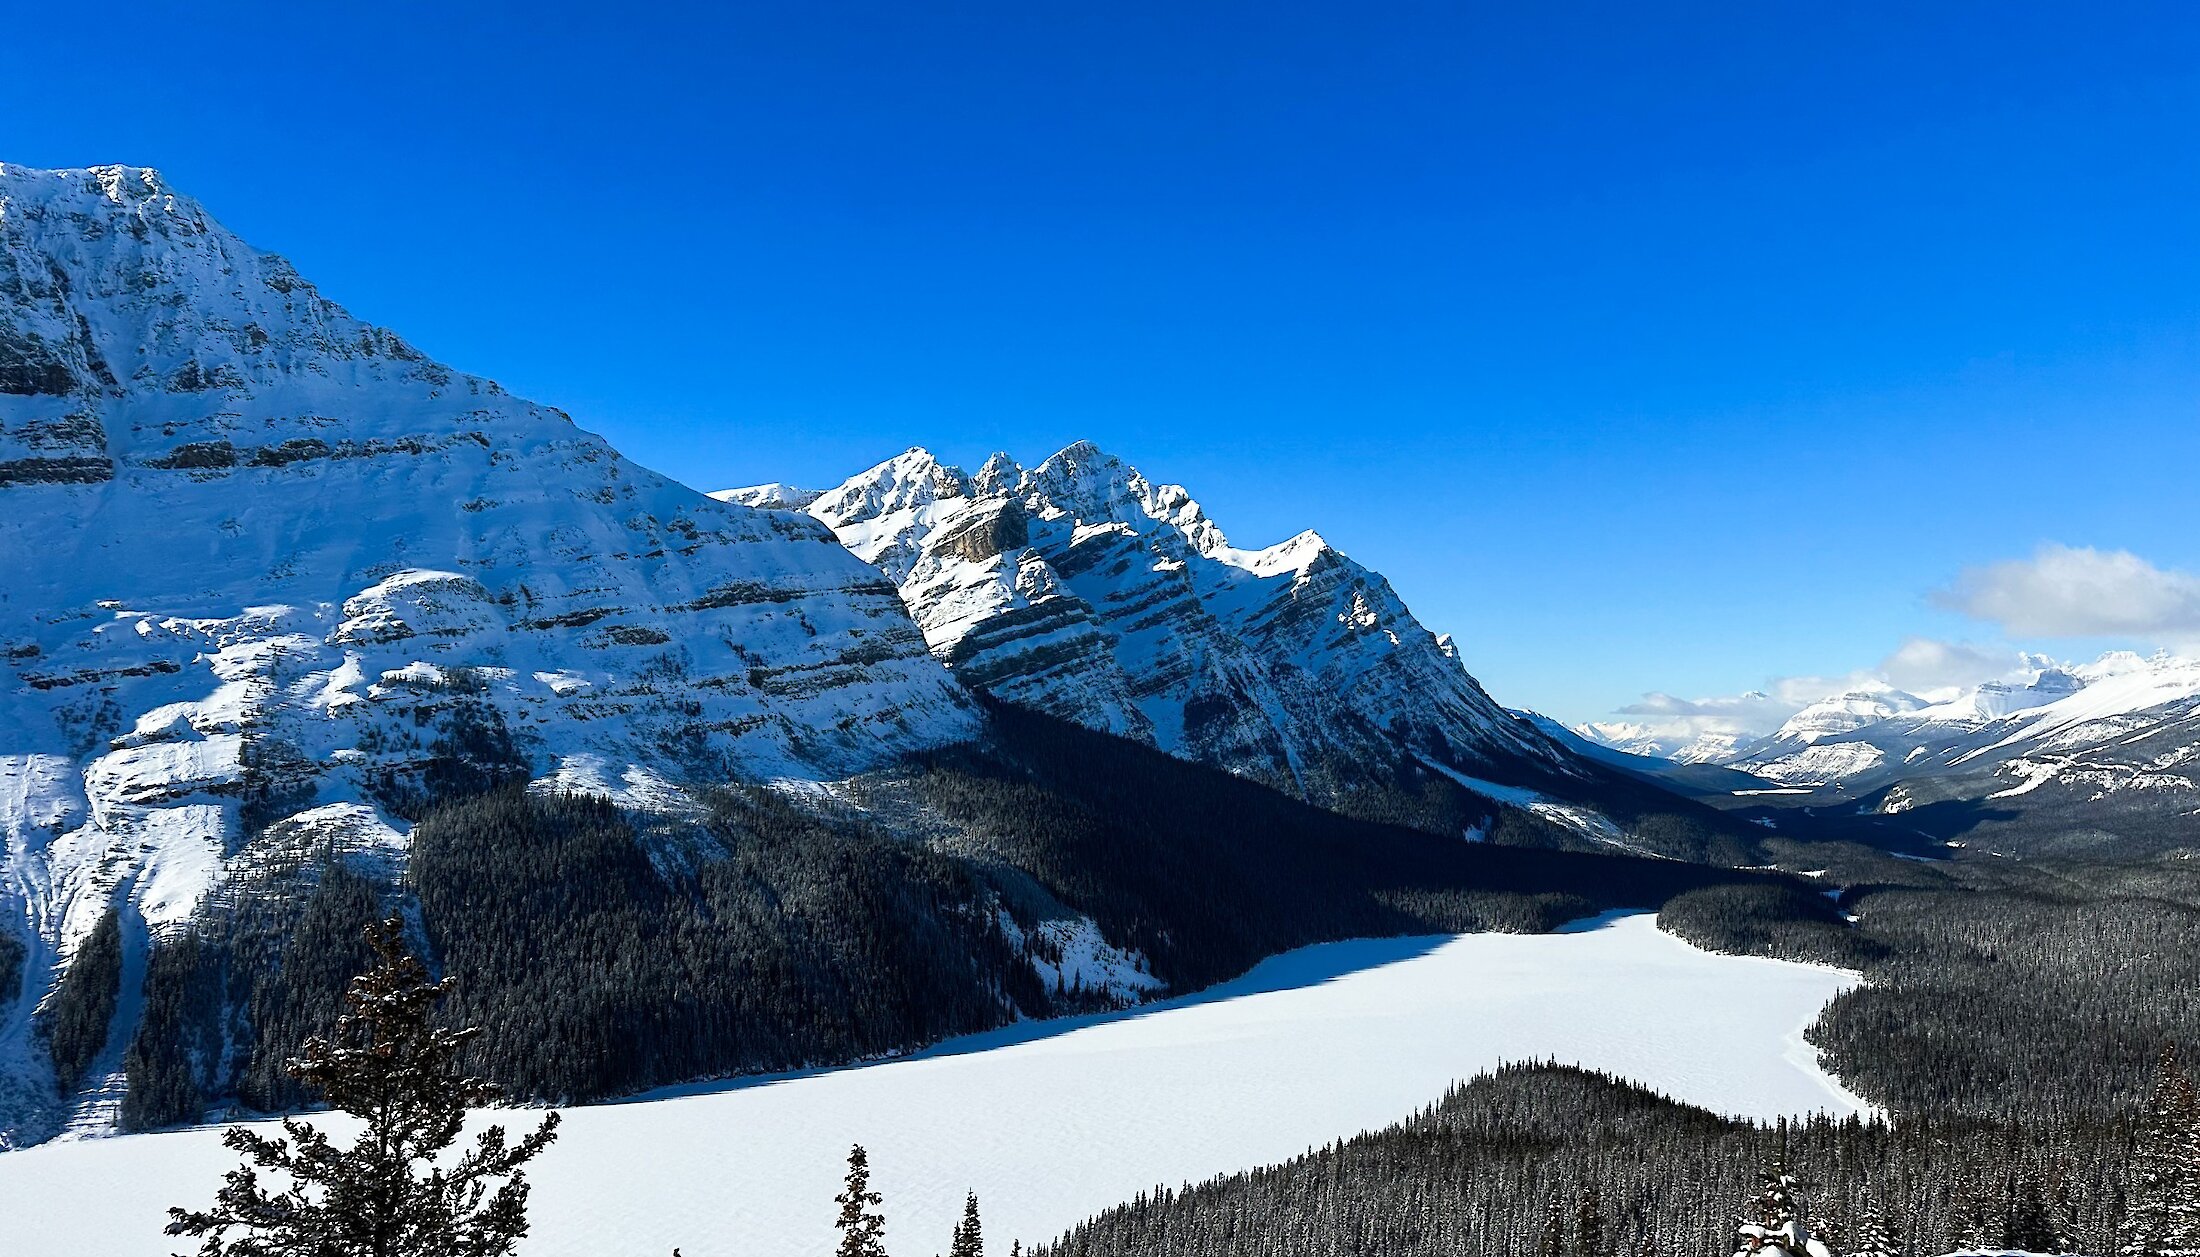 A view of Peyto Lake from the viewing deck along the Icefield Parkway